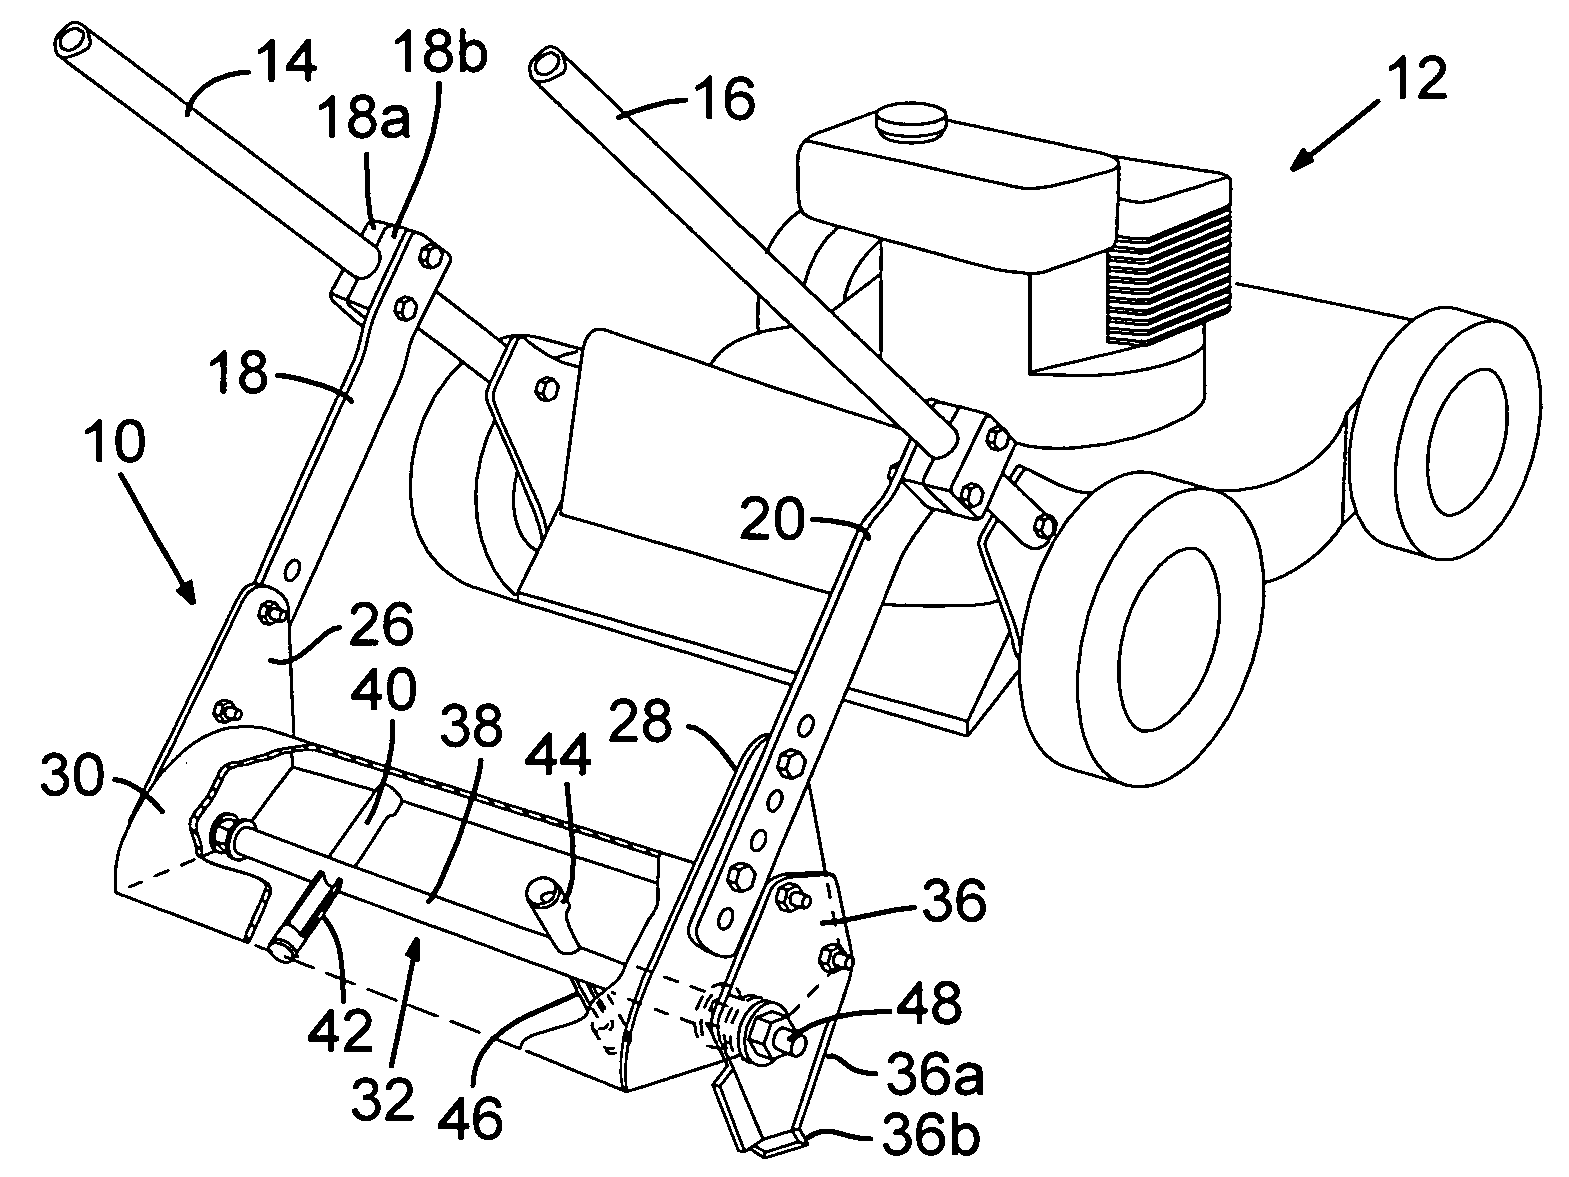 Multi-purpose tool for attachment to a lawnmower